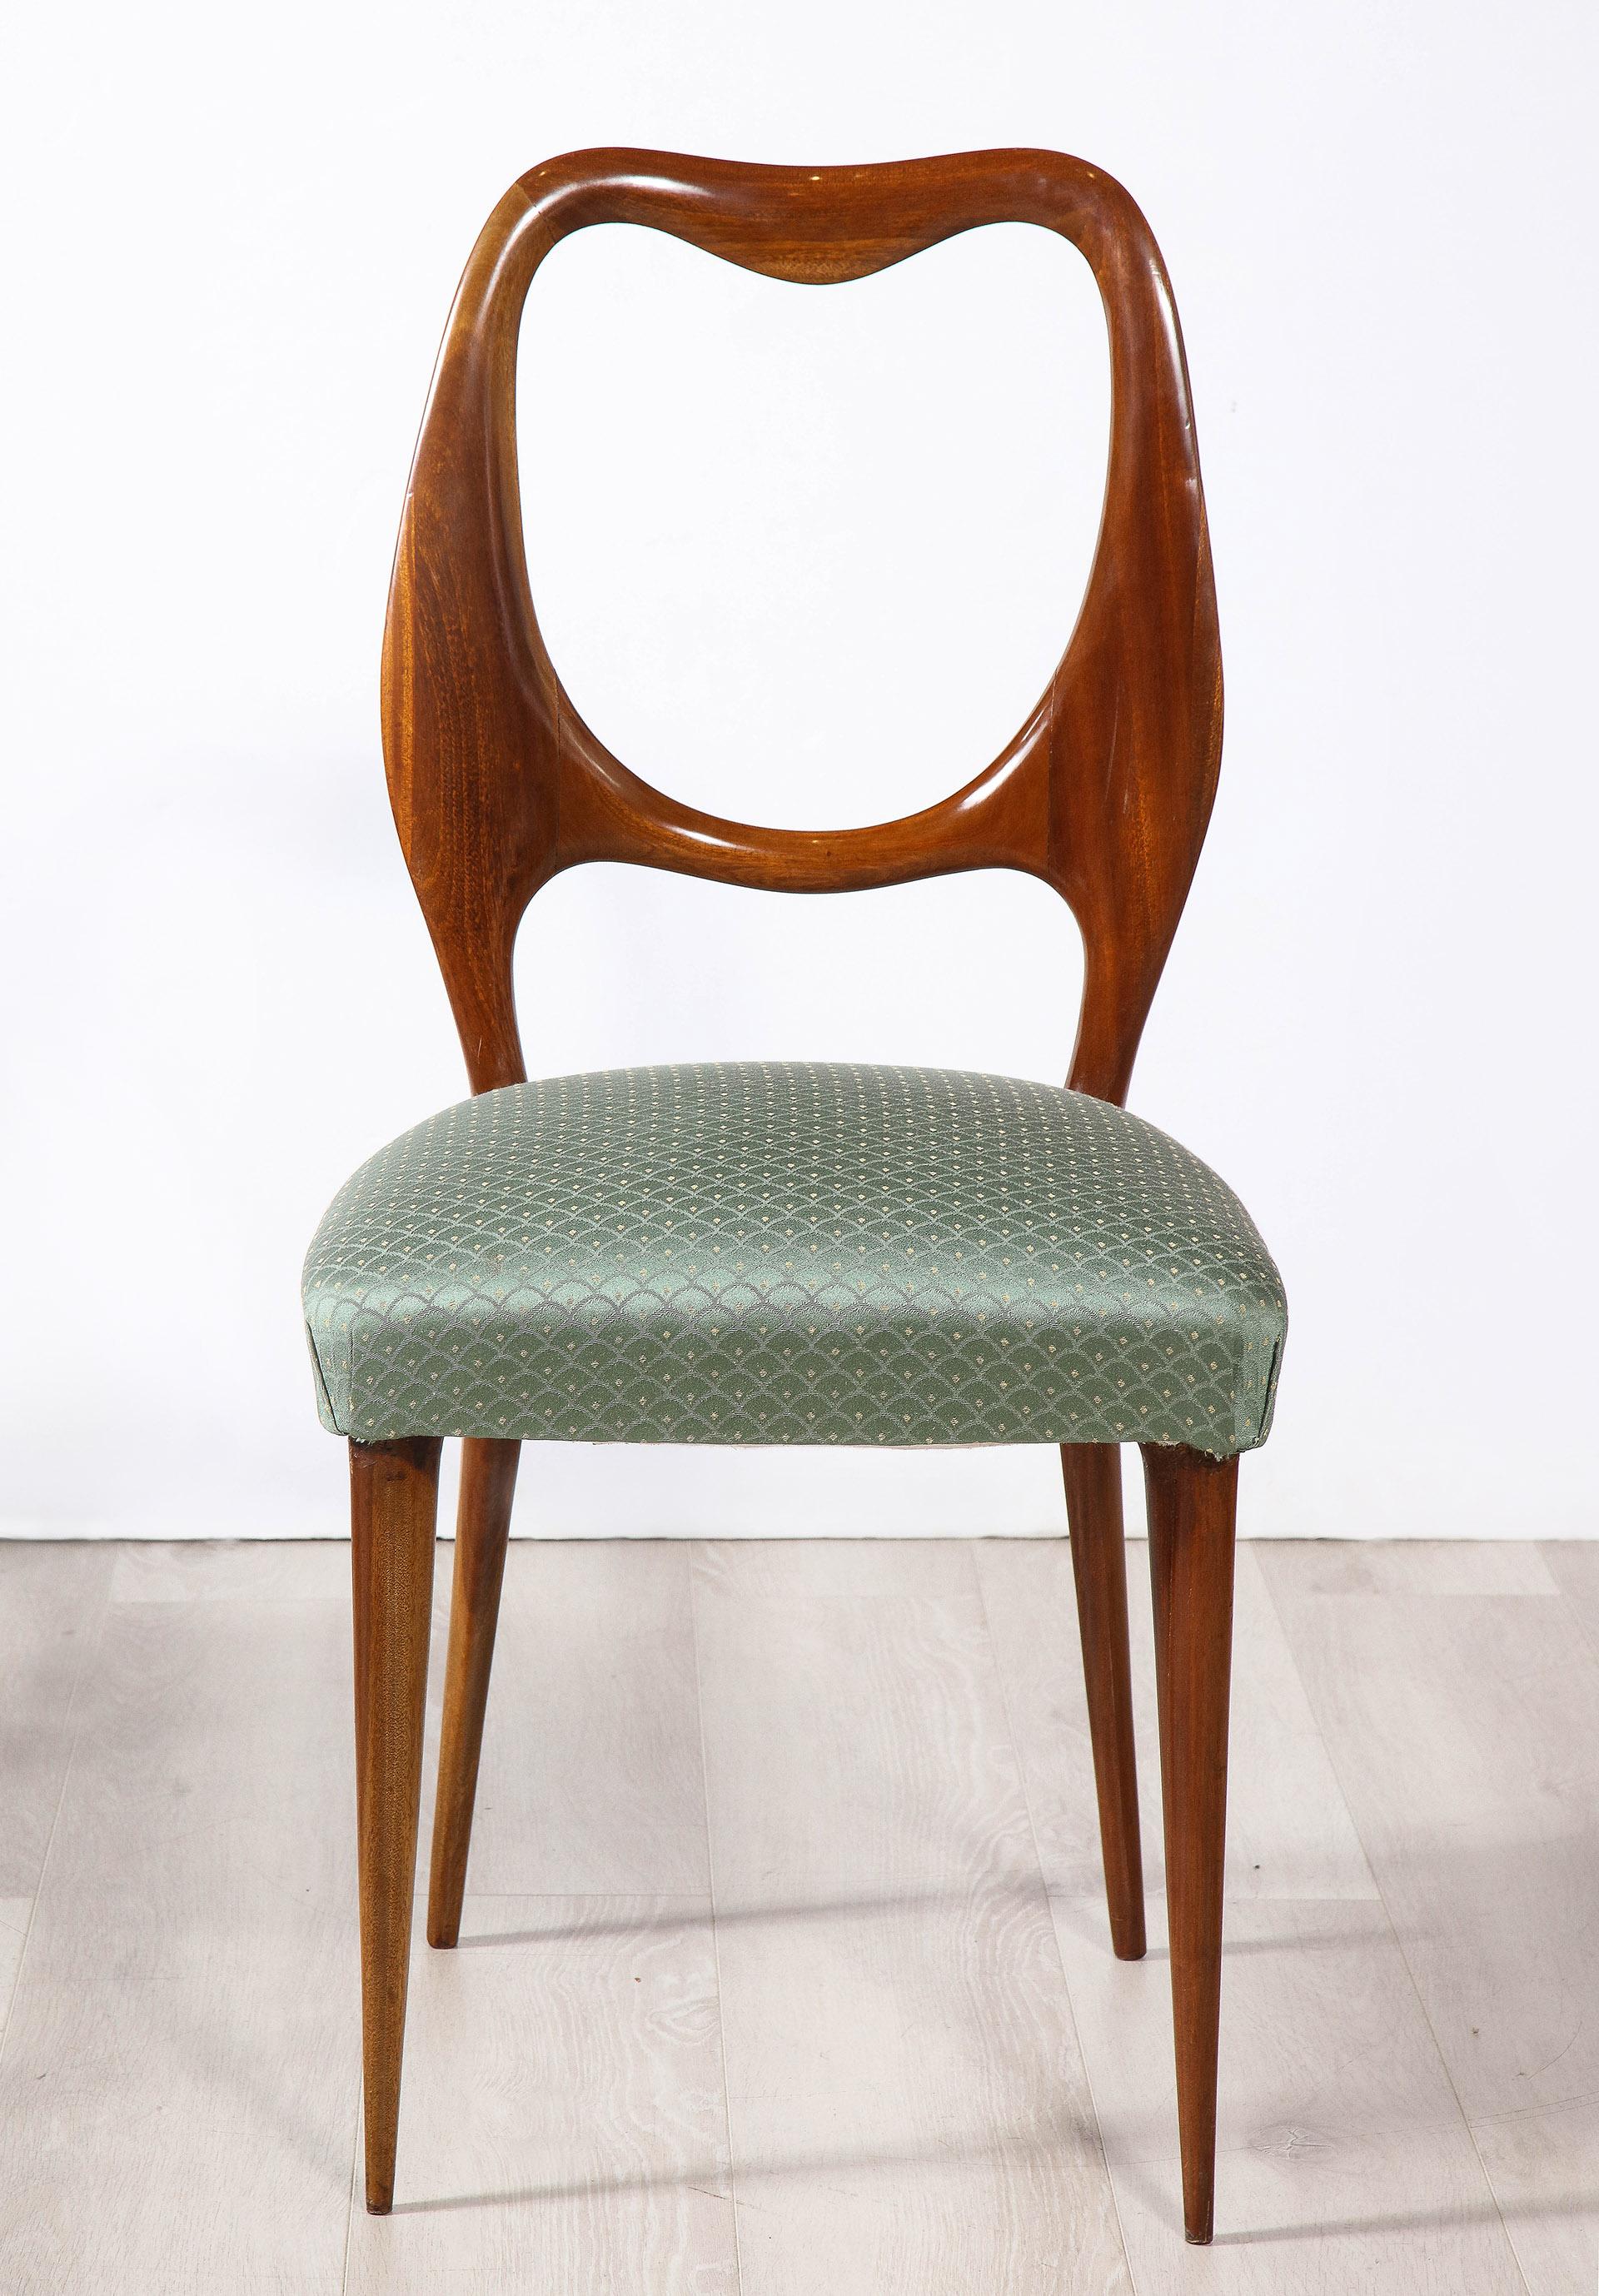 The set of 4 mahogany dining side chairs each with a unique open back and upholstered seats, raised on tapering legs. 